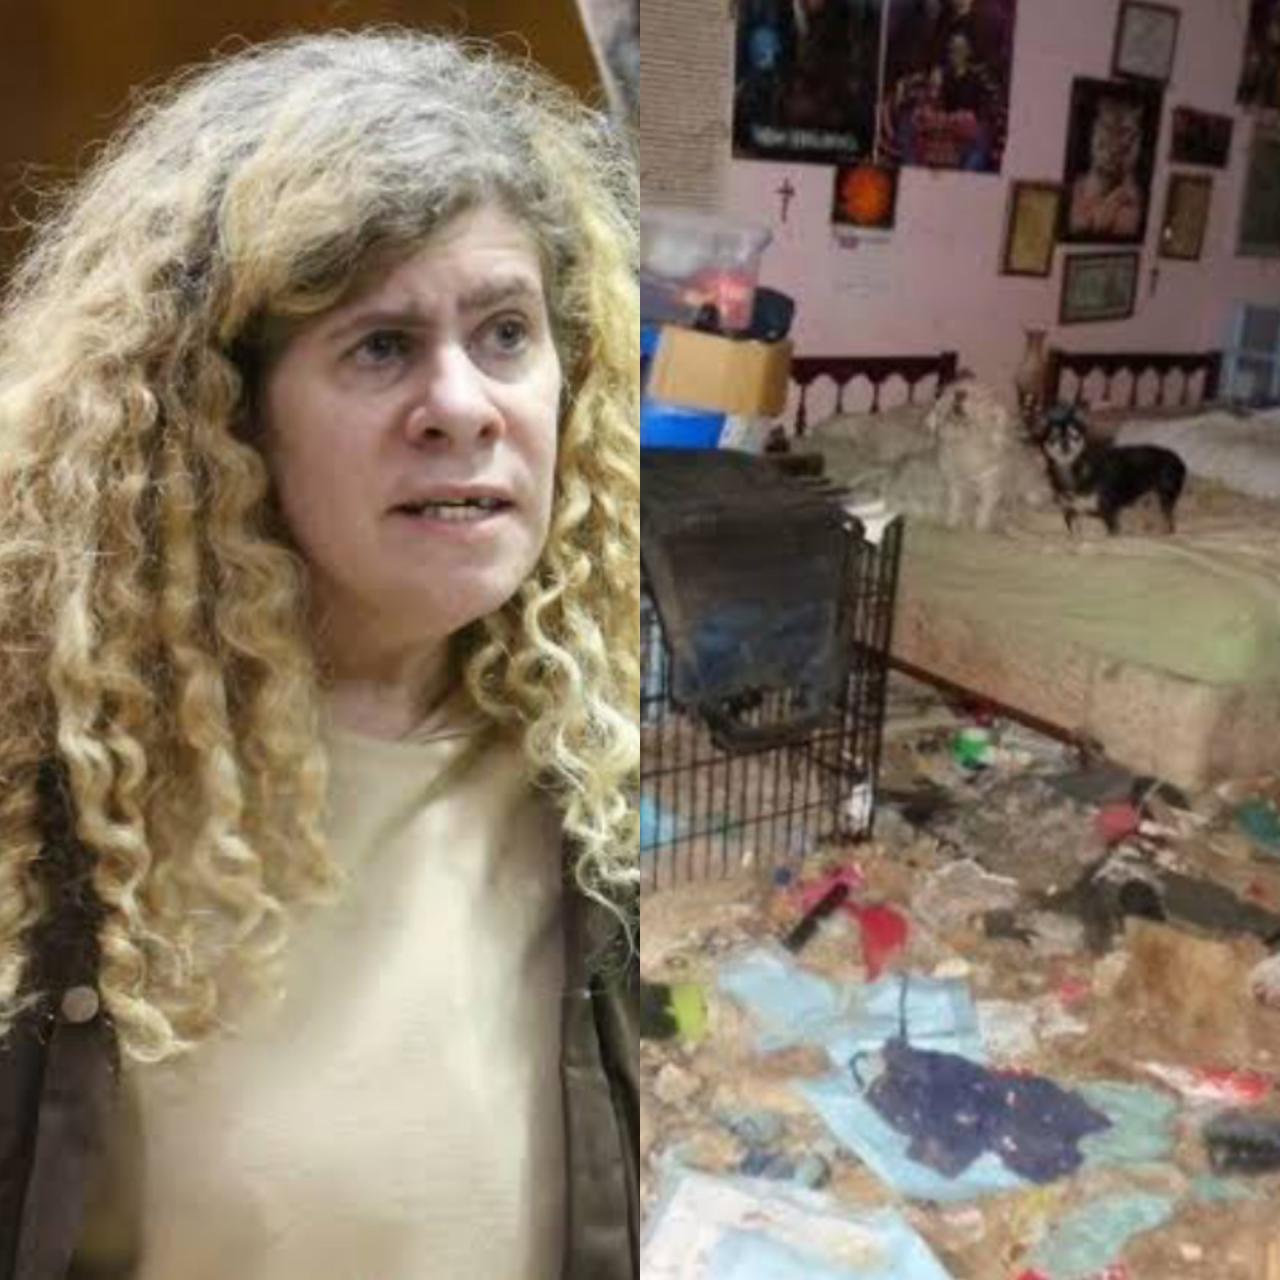 Woman caught keeping more than 50 pets including dogs, cats, turtles, fishes, guinea pigs and rabbits in her home (photos)